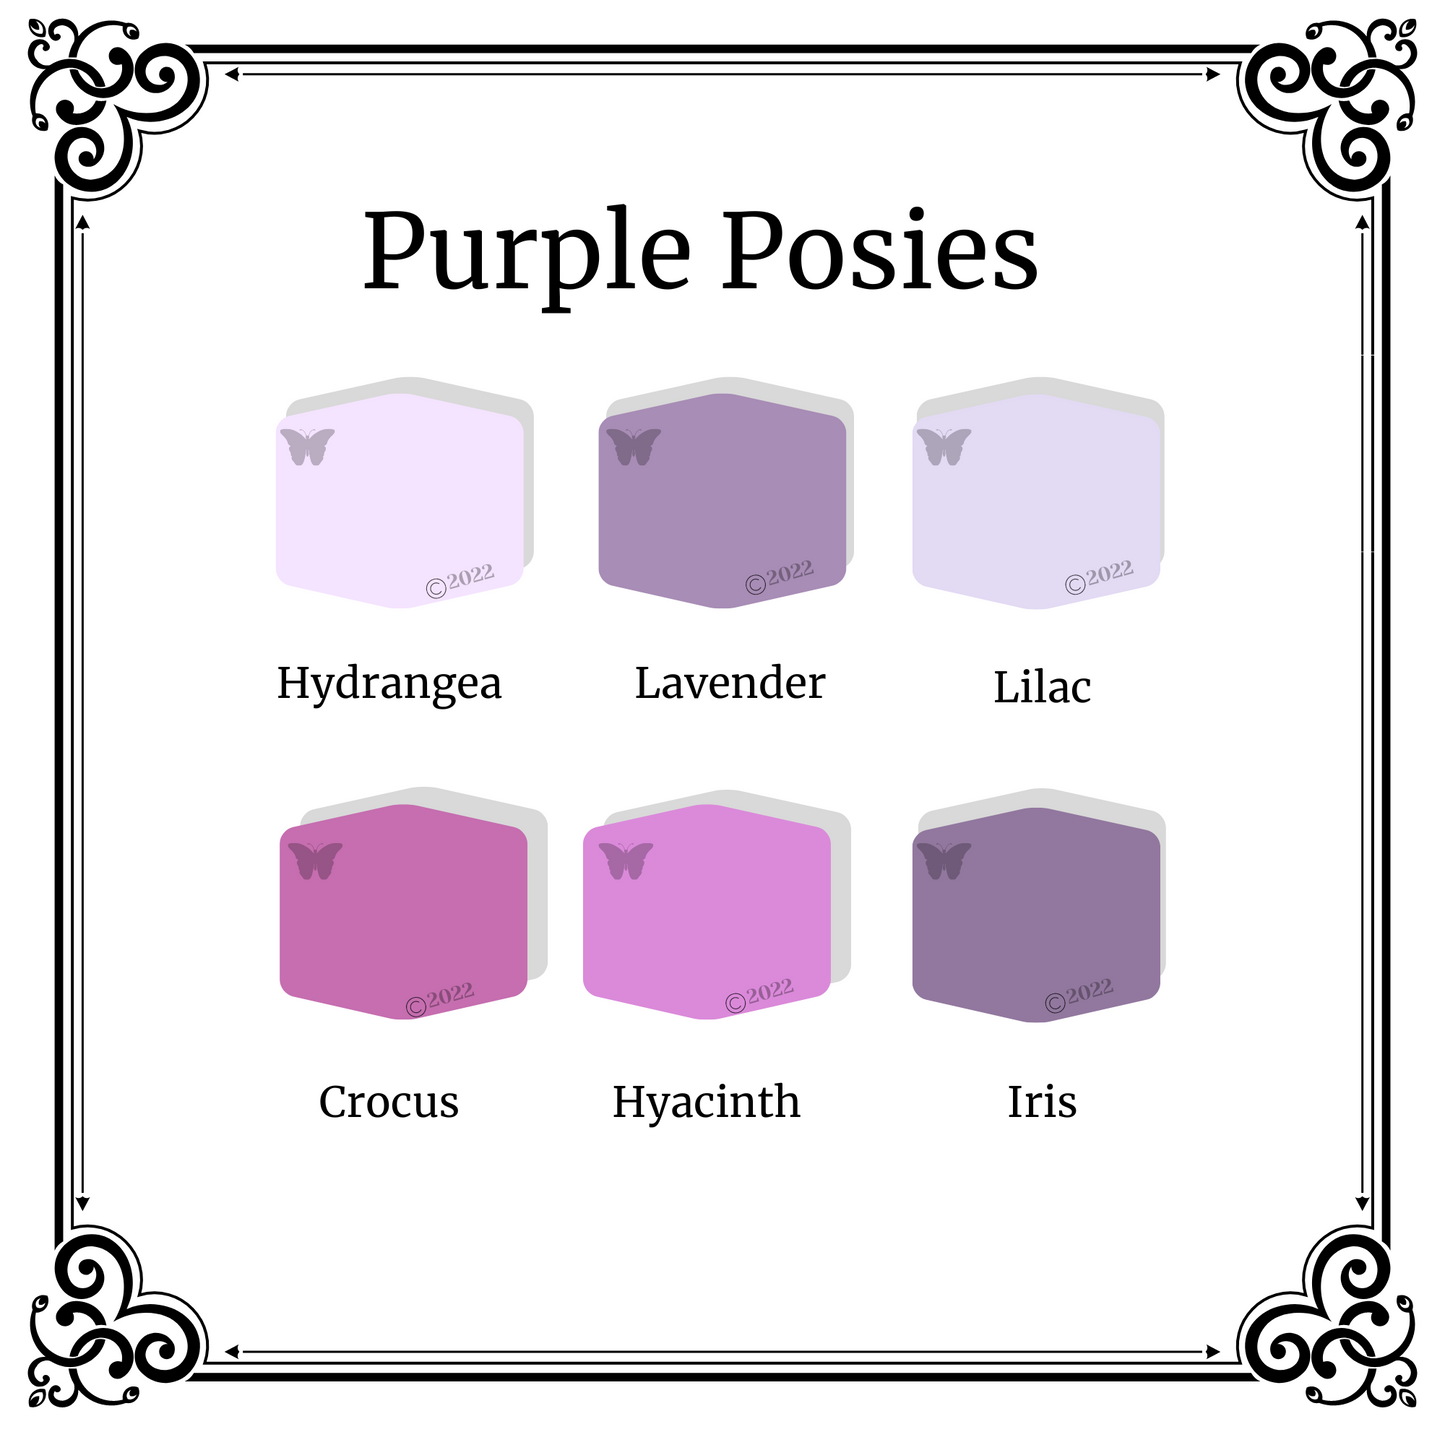 Purple Posies Polymer Clay Tutorial - the 6 gorgeous colors!